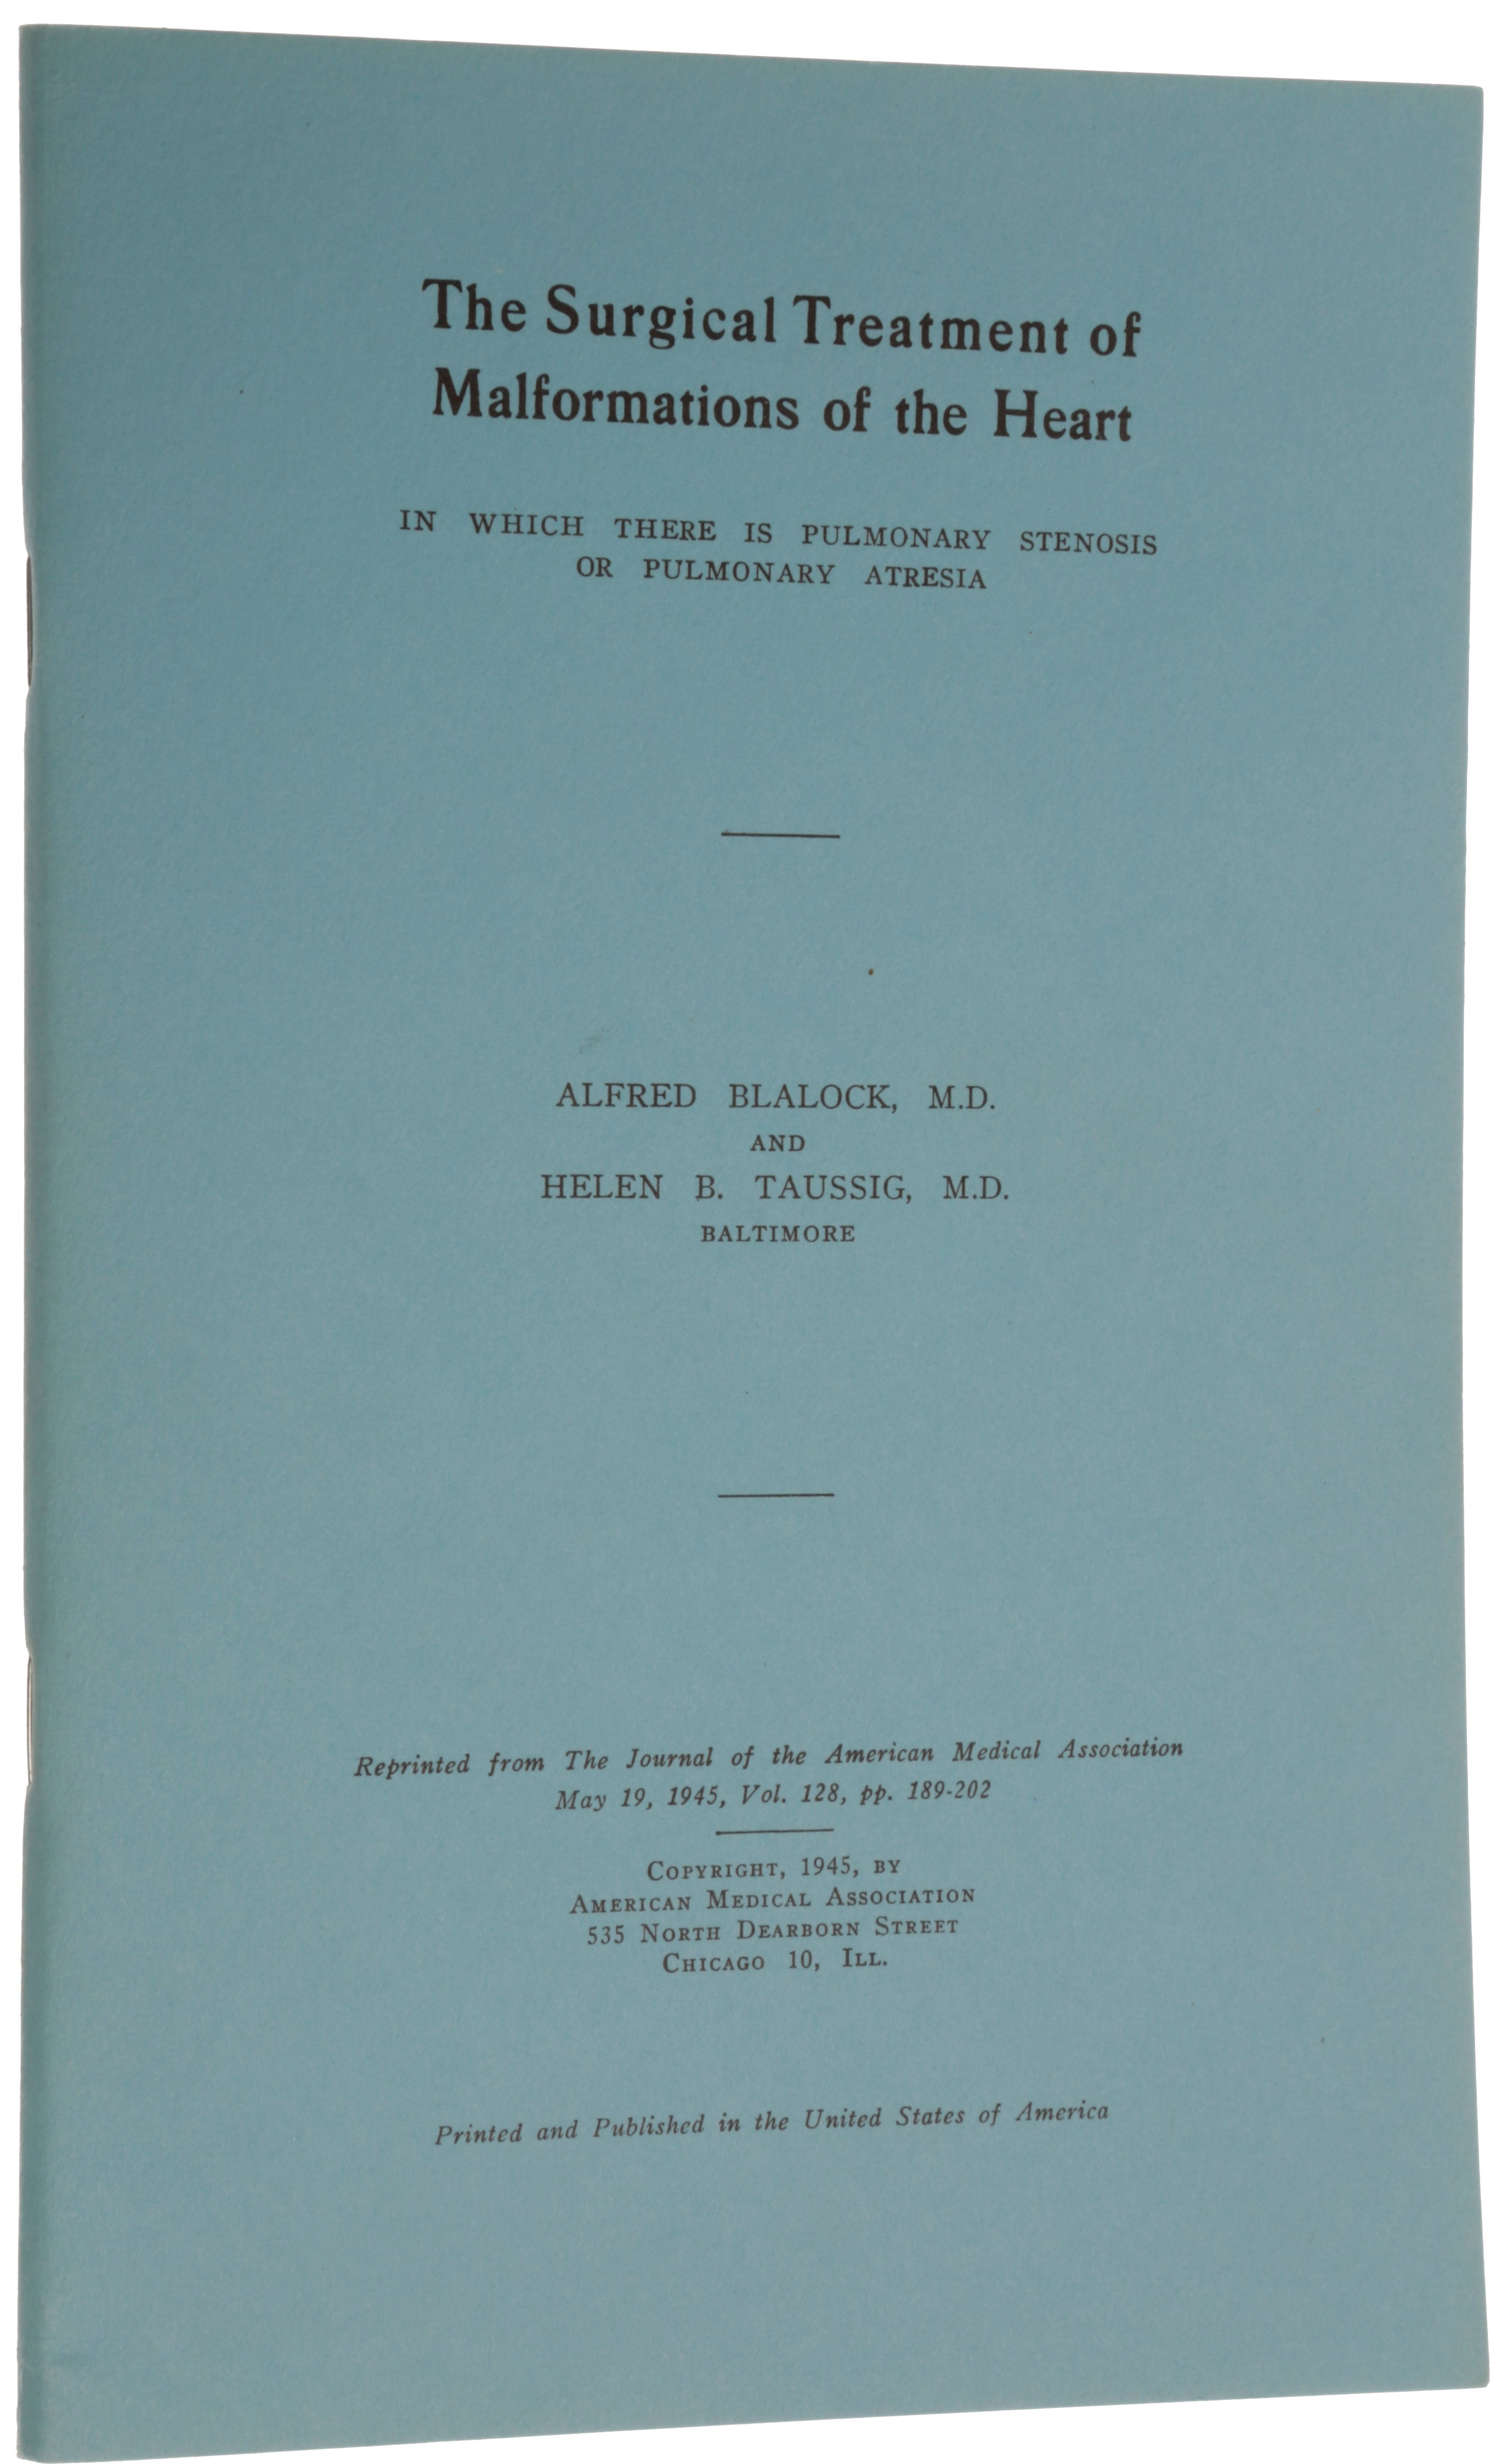 Item #5630 The Surgical Treatment of Malformations of the Heart in Which There is Pulmonary Stenosis or Pulmonary Atresia. Offprint from The Journal of the American Medical Association, Vol. 128, May 19, 1945, pp. 189-202. Alfred BLALOCK, Helen TAUSSIG.